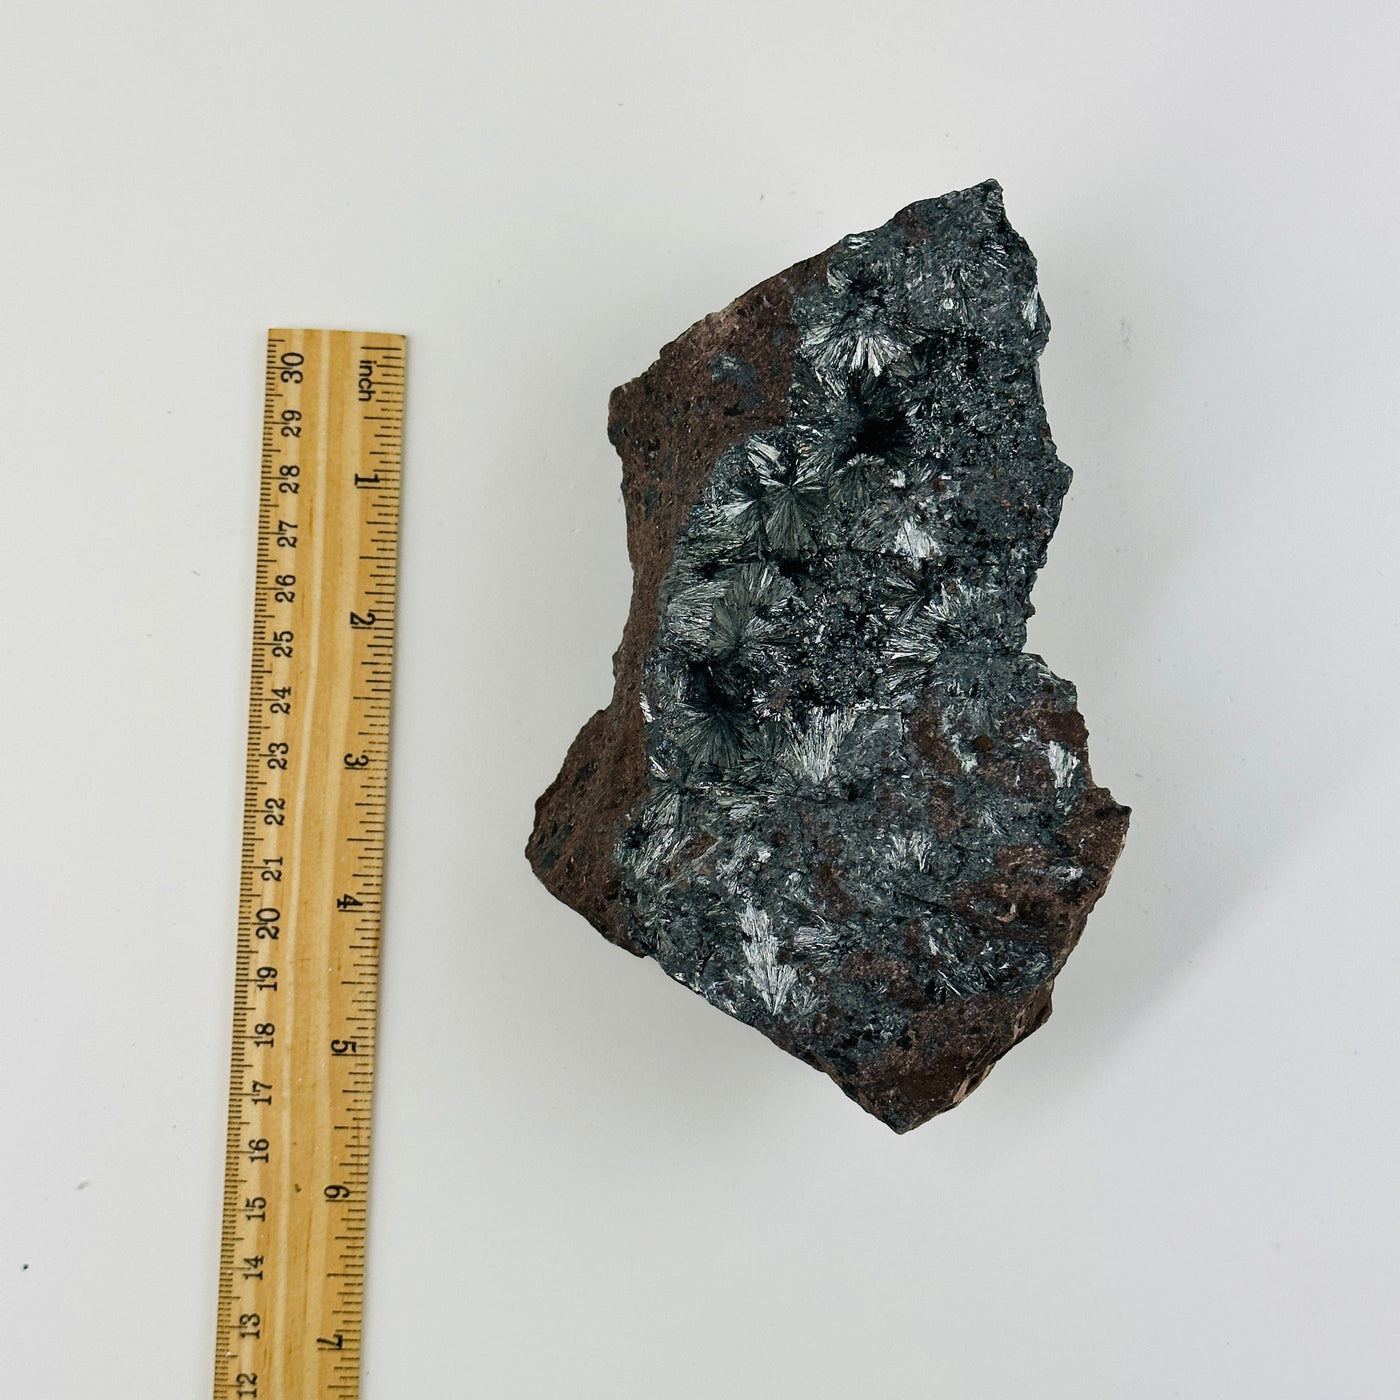 stibnite on matrix formation next to a ruler for size reference